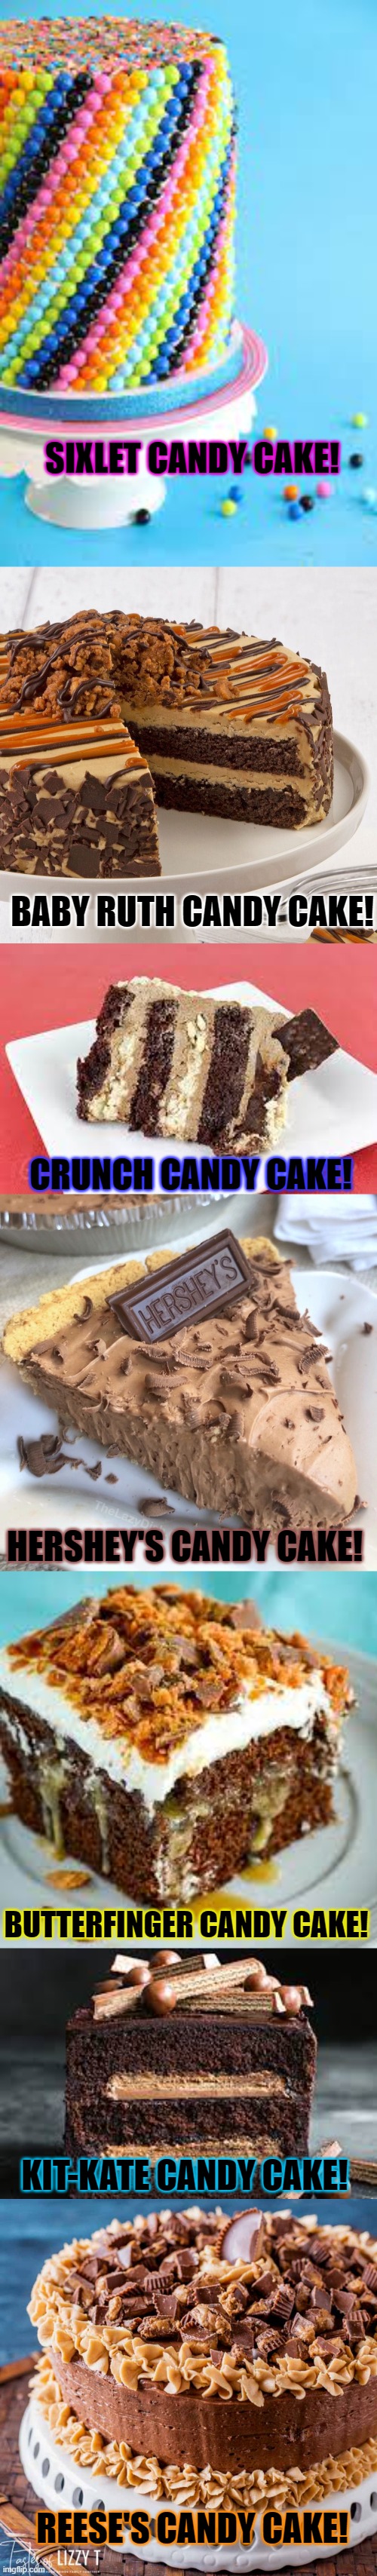 Candy Cakes! |  SIXLET CANDY CAKE! BABY RUTH CANDY CAKE! CRUNCH CANDY CAKE! HERSHEY'S CANDY CAKE! BUTTERFINGER CANDY CAKE! KIT-KATE CANDY CAKE! REESE'S CANDY CAKE! | image tagged in cake,candy | made w/ Imgflip meme maker